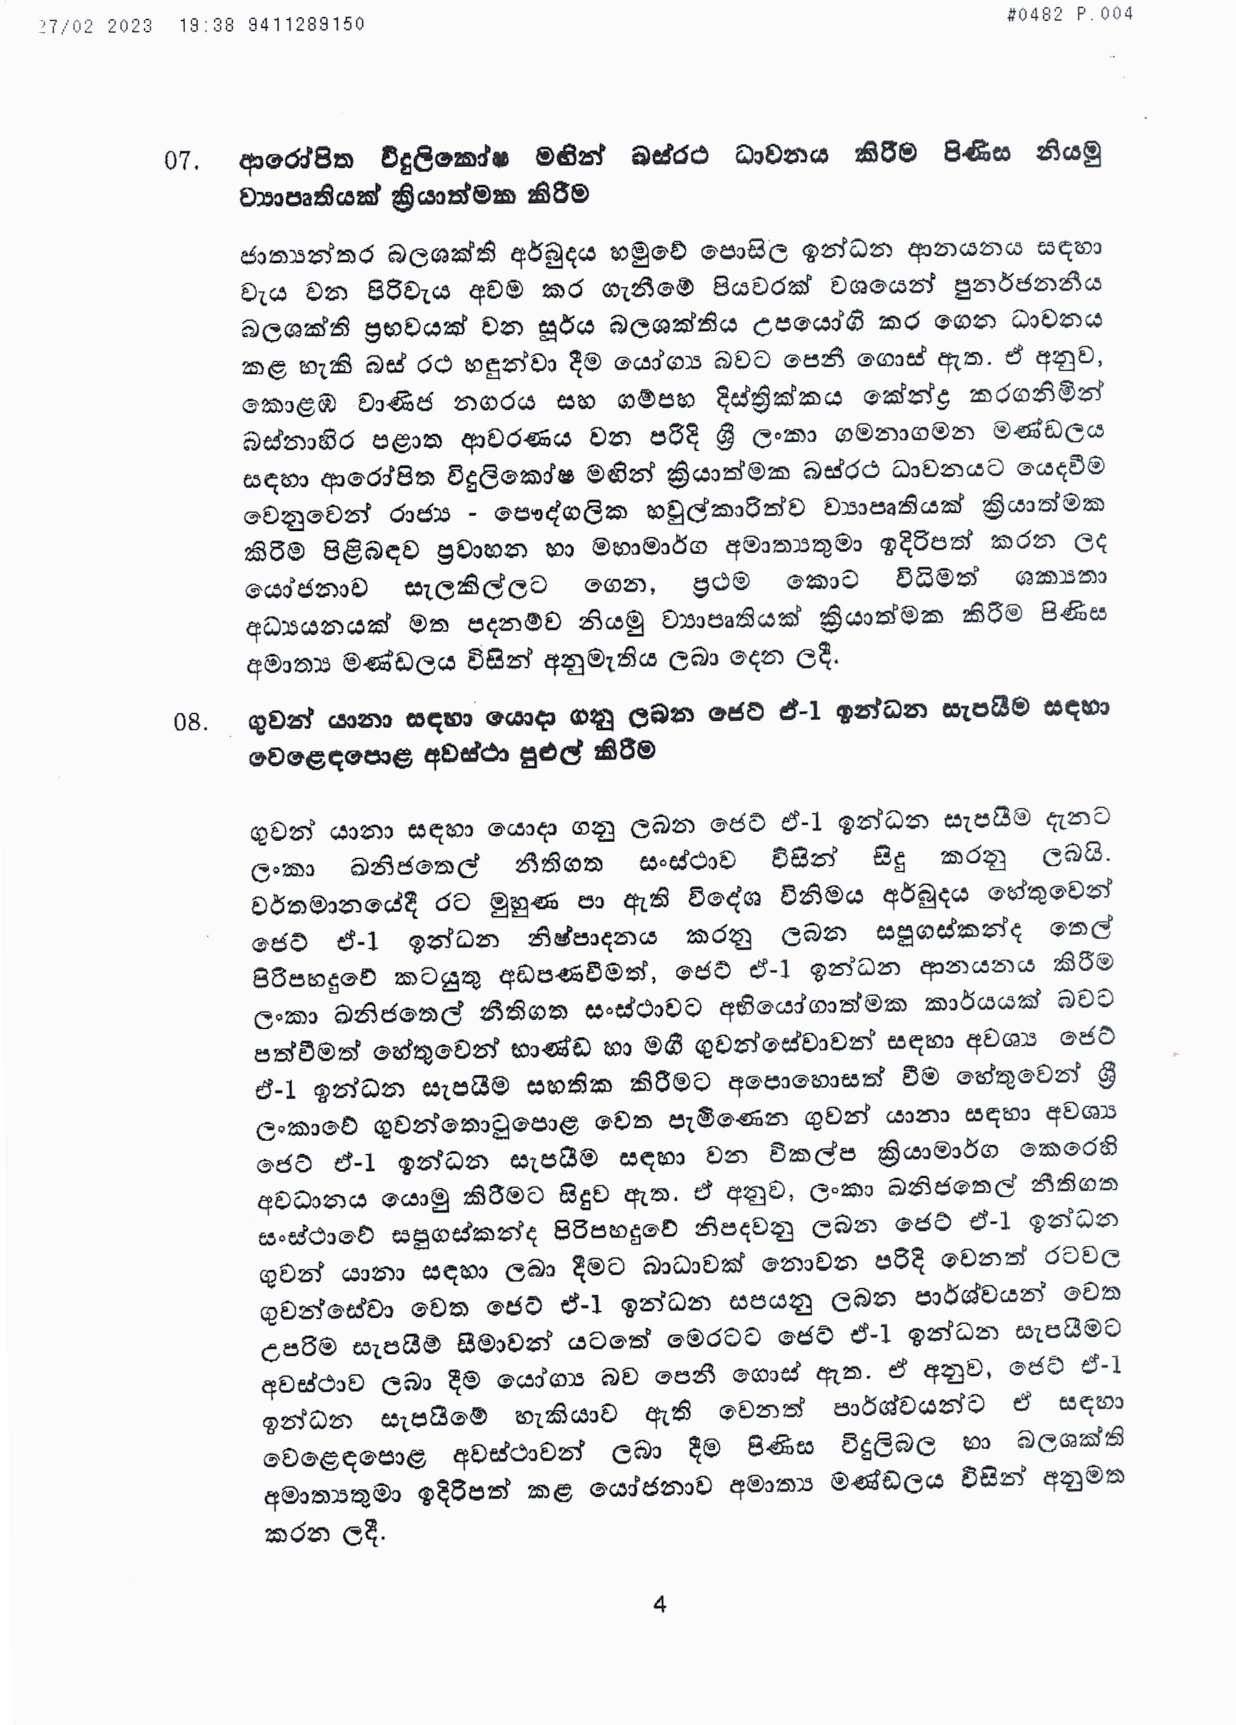 Cabinet Decision on 27.07.2023 page 004